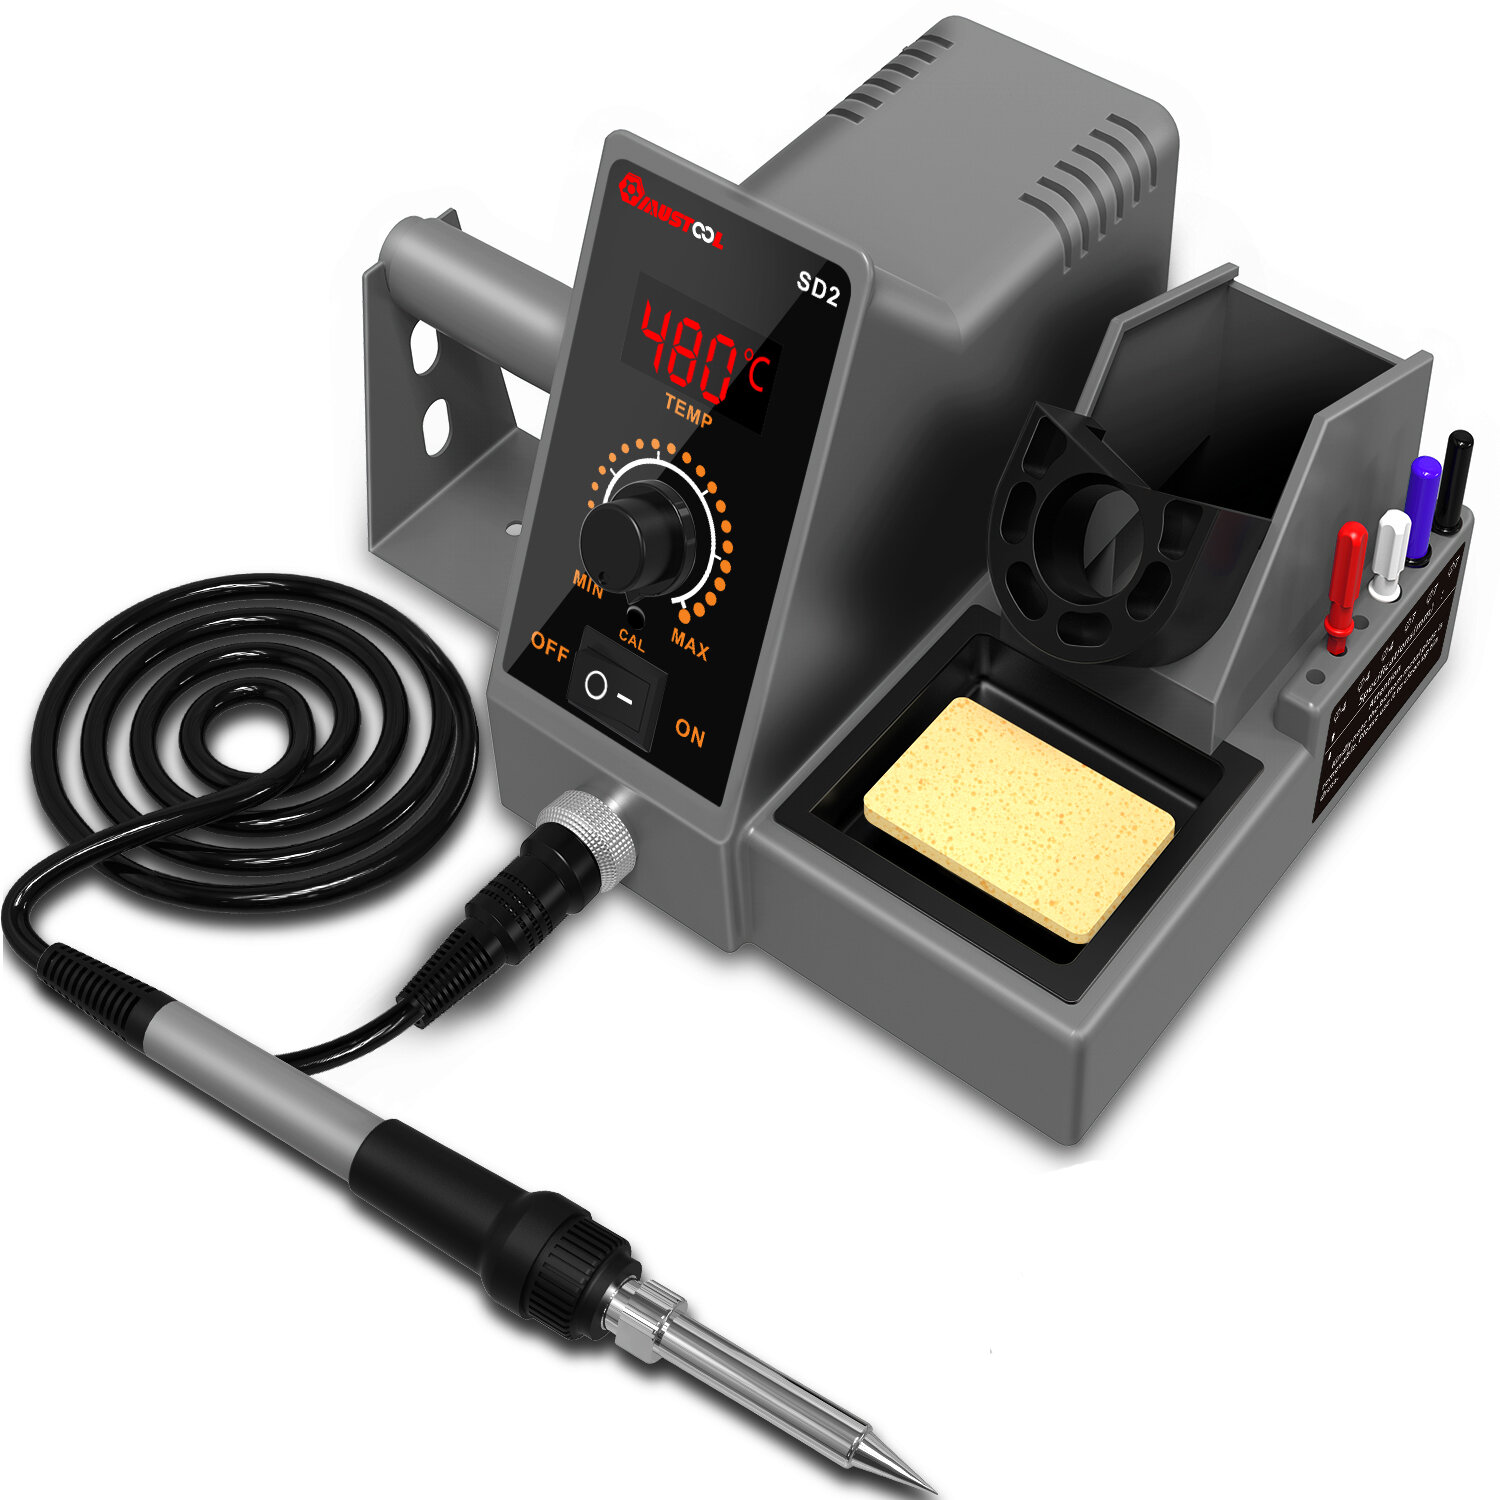 MUSTOOL SD1 SD2 LCD 60W Soldering Station Professional PID Soldering Iron Station Tool Kit Adjustable Temperature 200-48